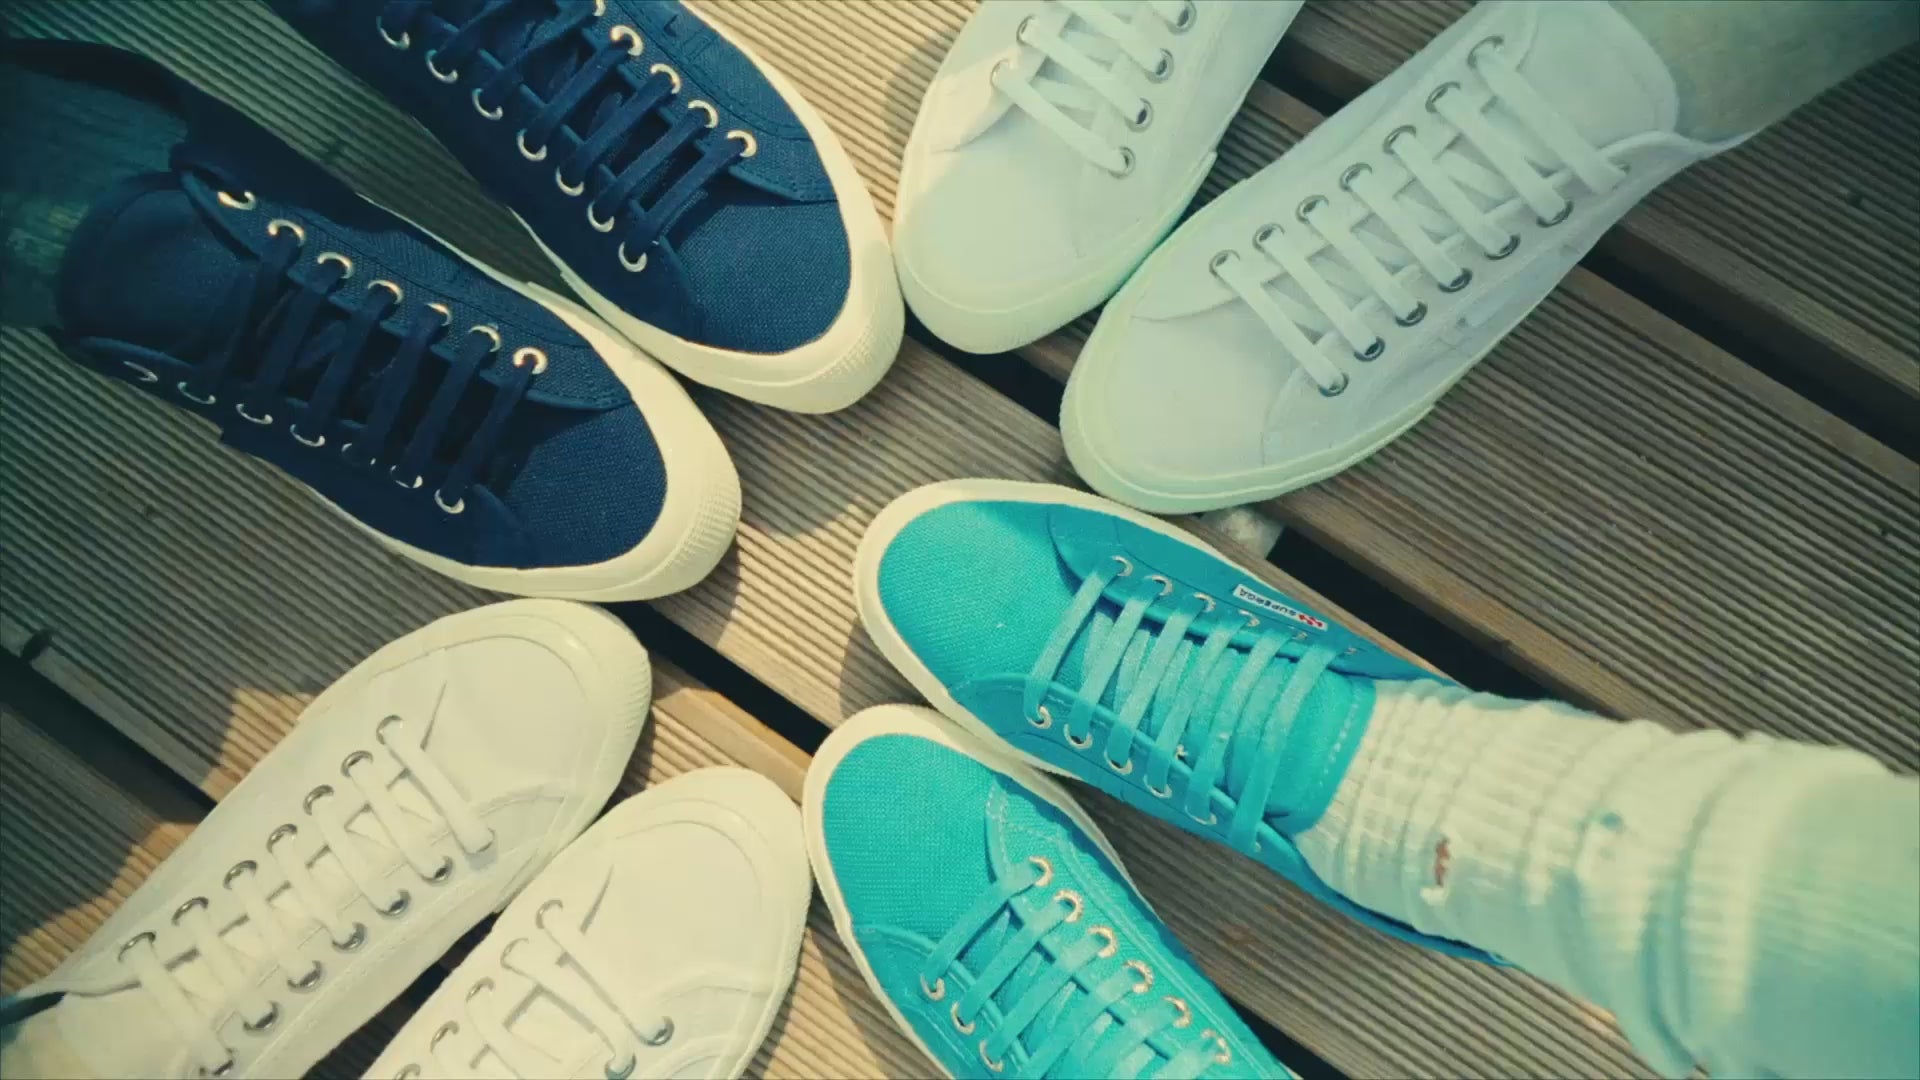 A video of the Superga 2750 Cotu Classic Sneakers